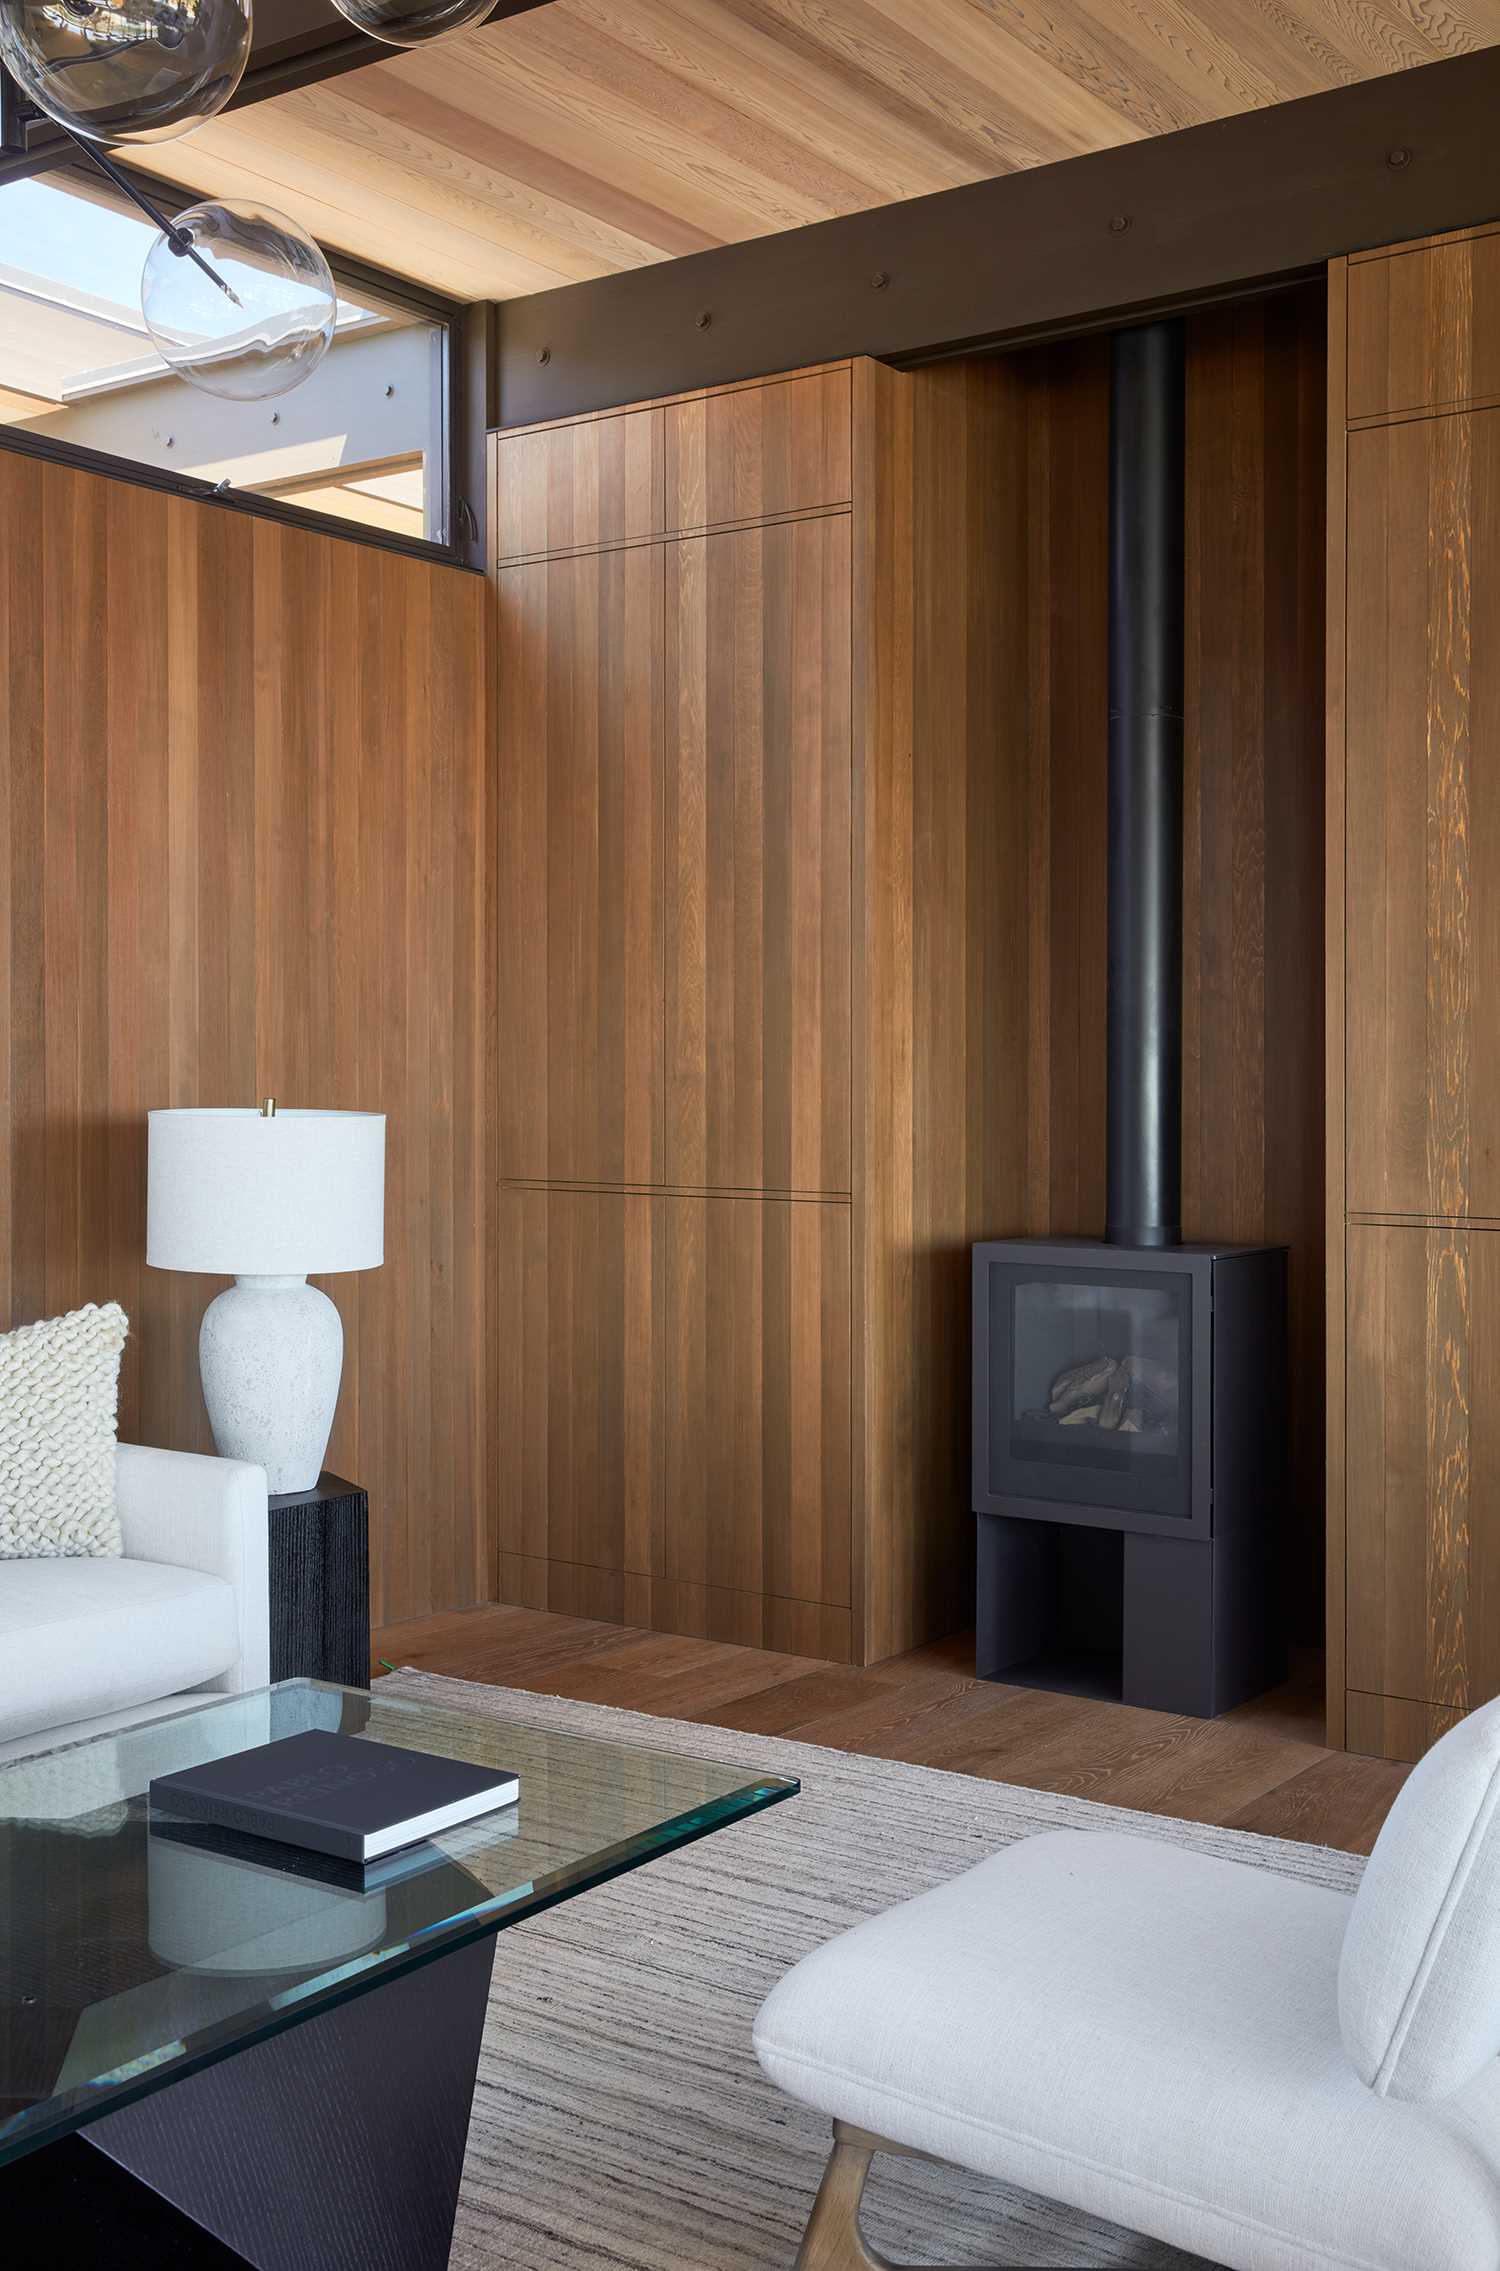 A mid-century modern inspired living room with wood walls, built-in cabinets, and a black fireplace.